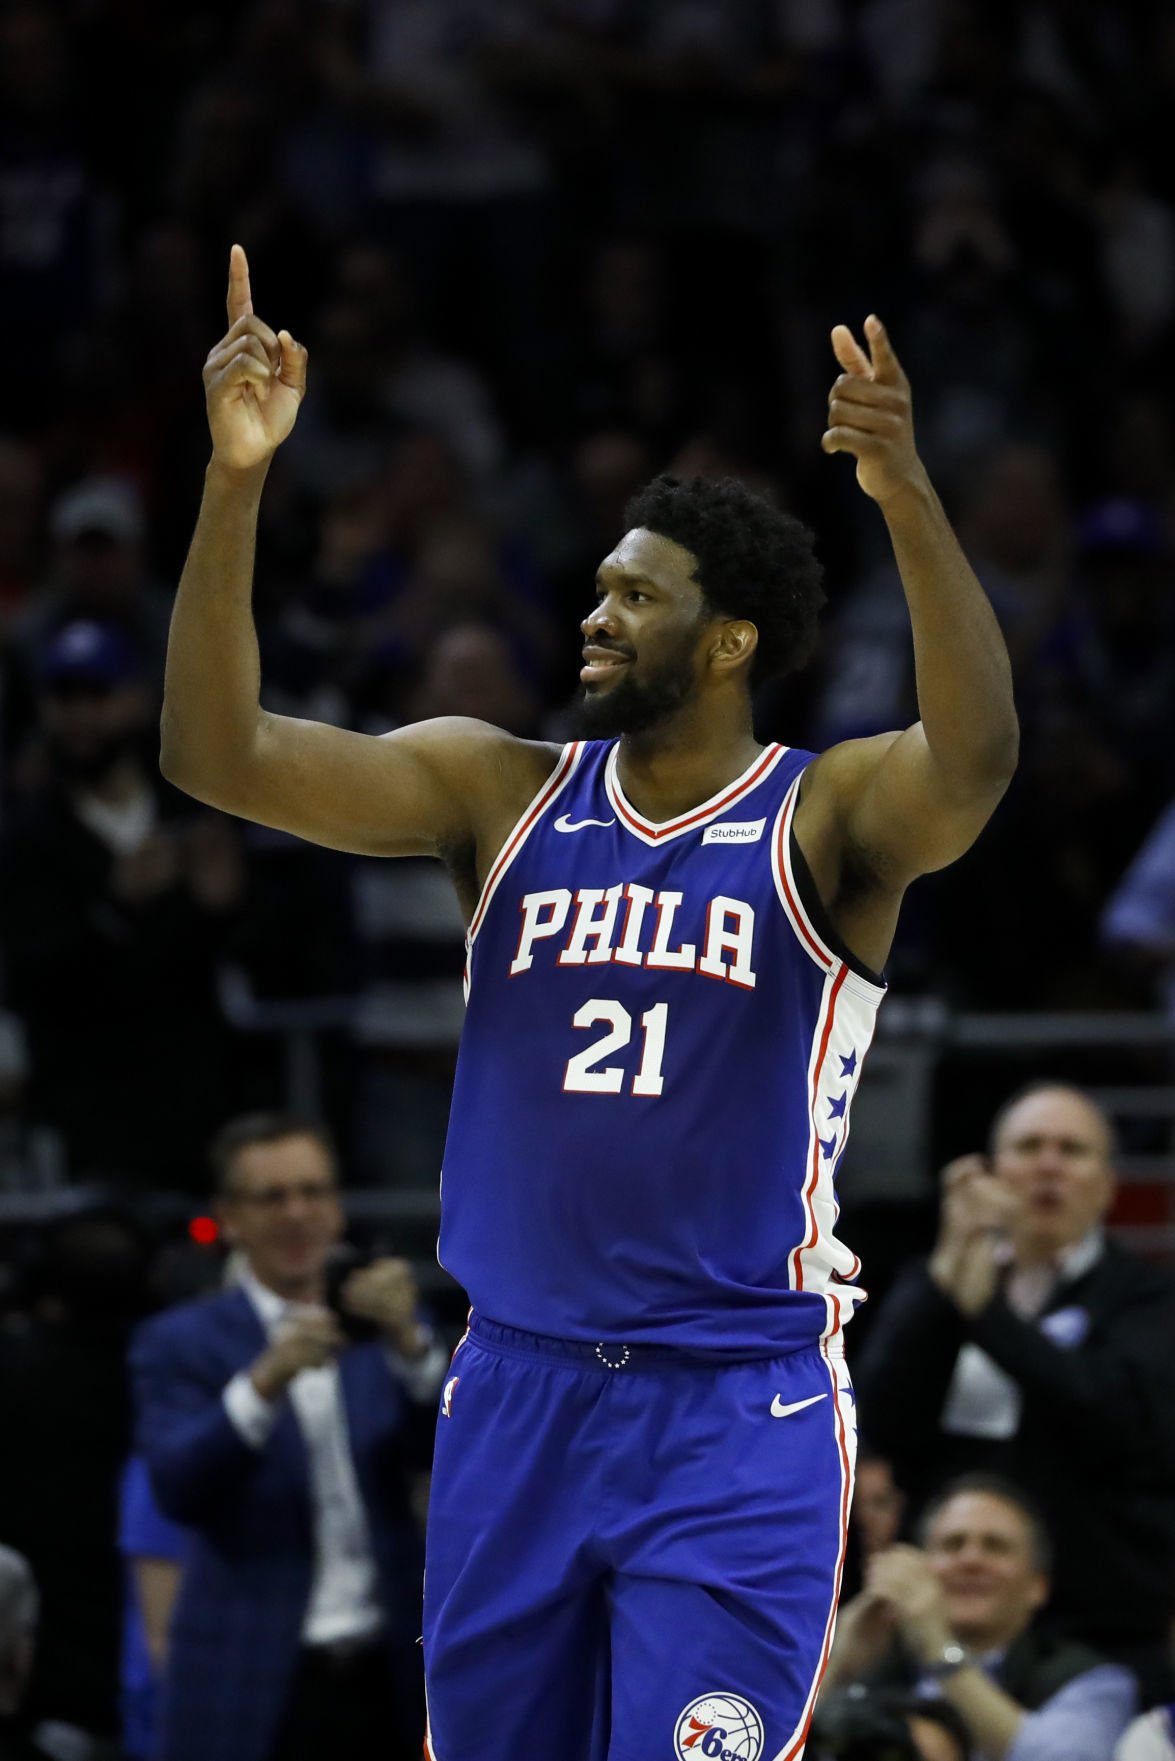 The Process, Joel Embiid, has now become the focal point for the Sixers